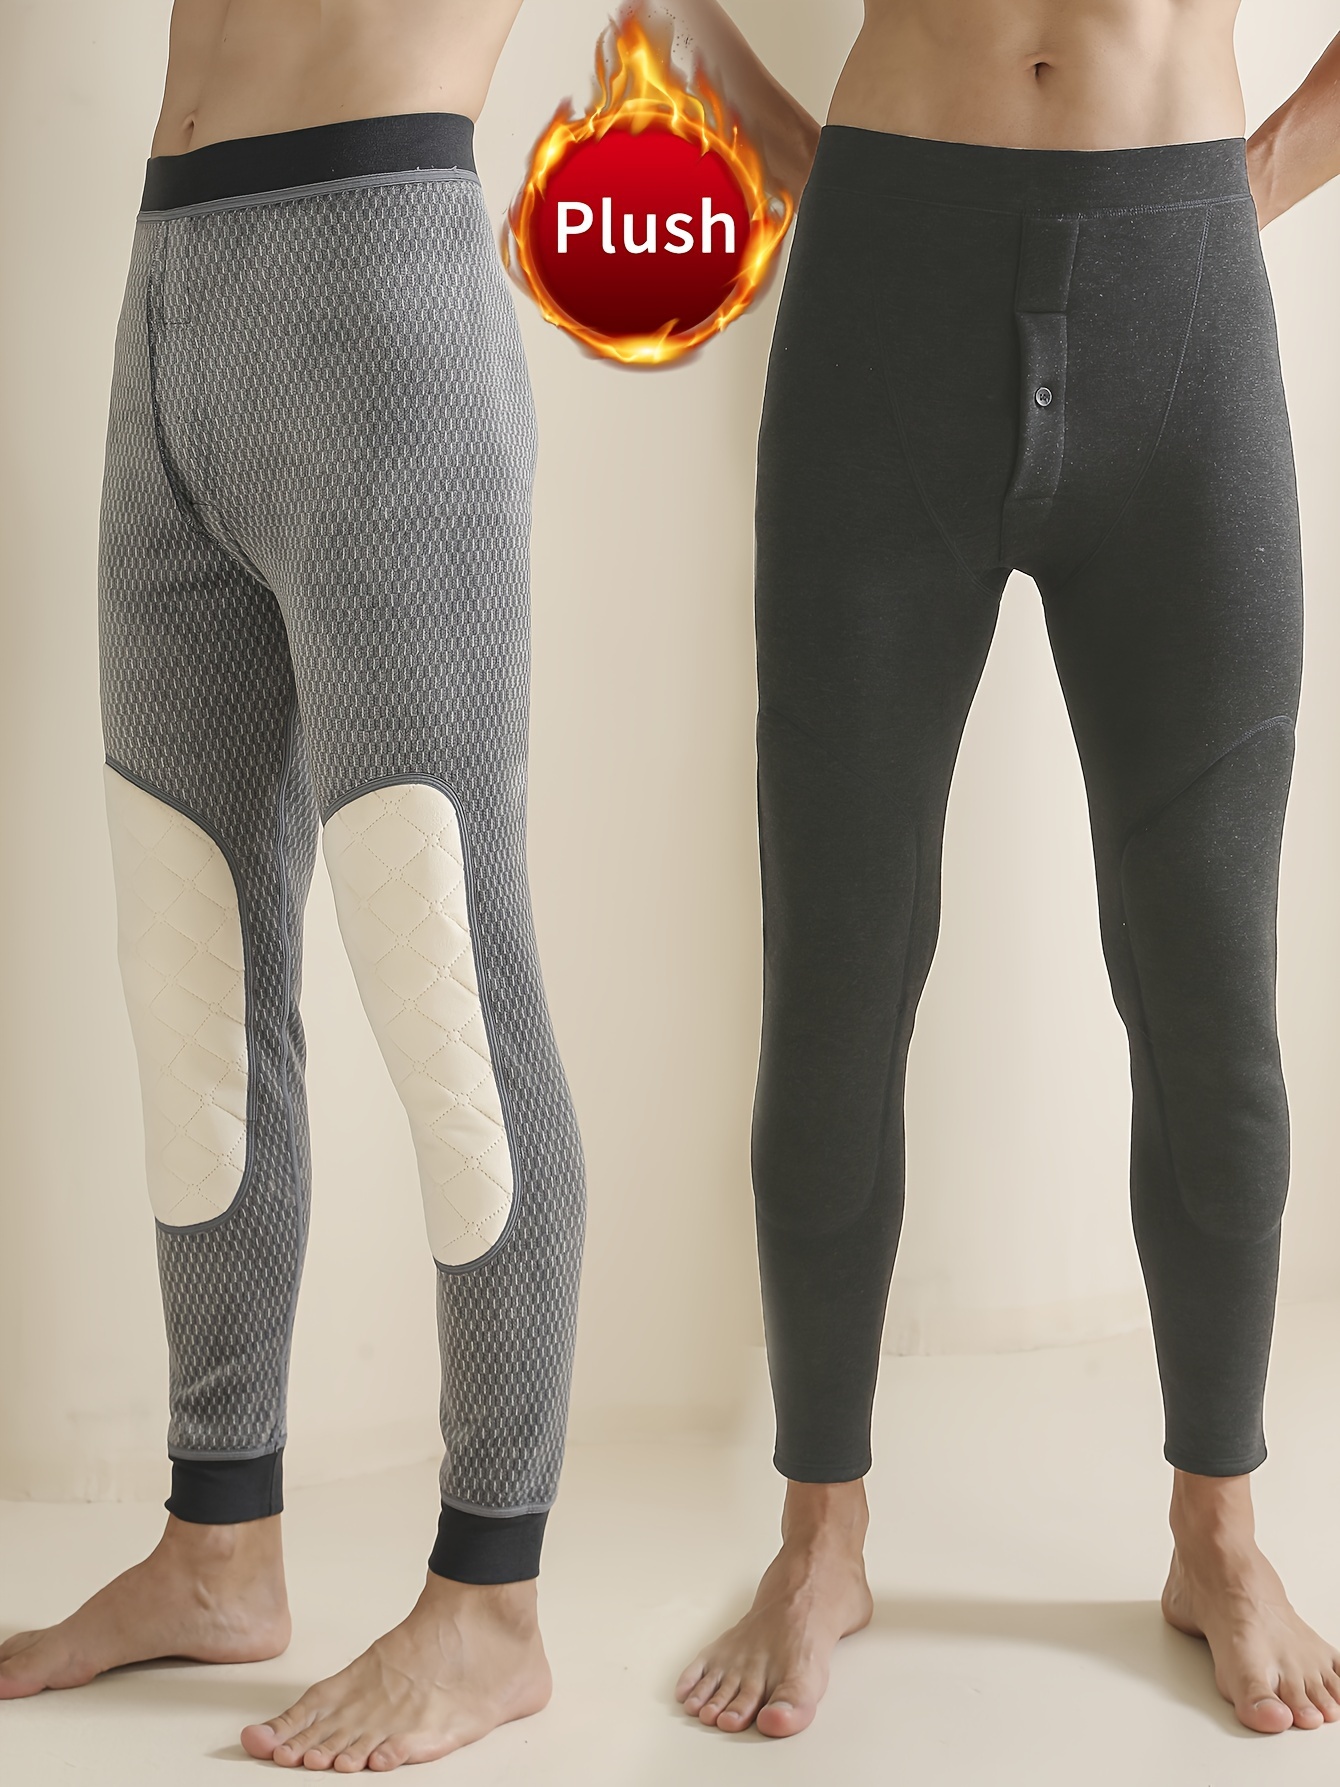 Men's Warm Pants, Autumn And Winter Fleece Thickened Thermal Underwear  Pants With Knee Pads, Base Layer